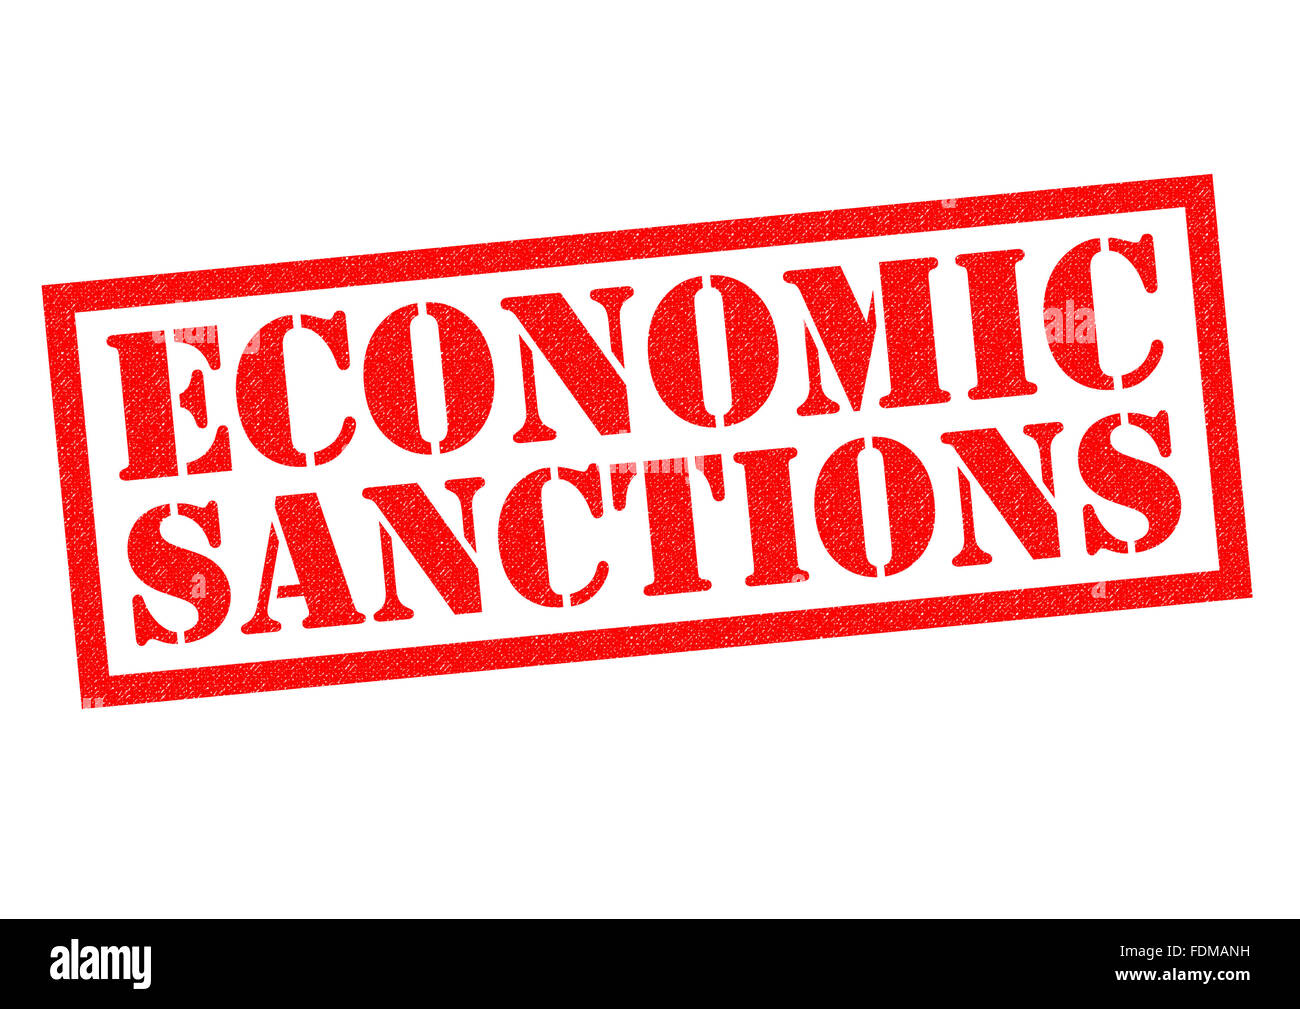 ECONOMIC SANCTIONS red Rubber Stamp over a white background. Stock Photo